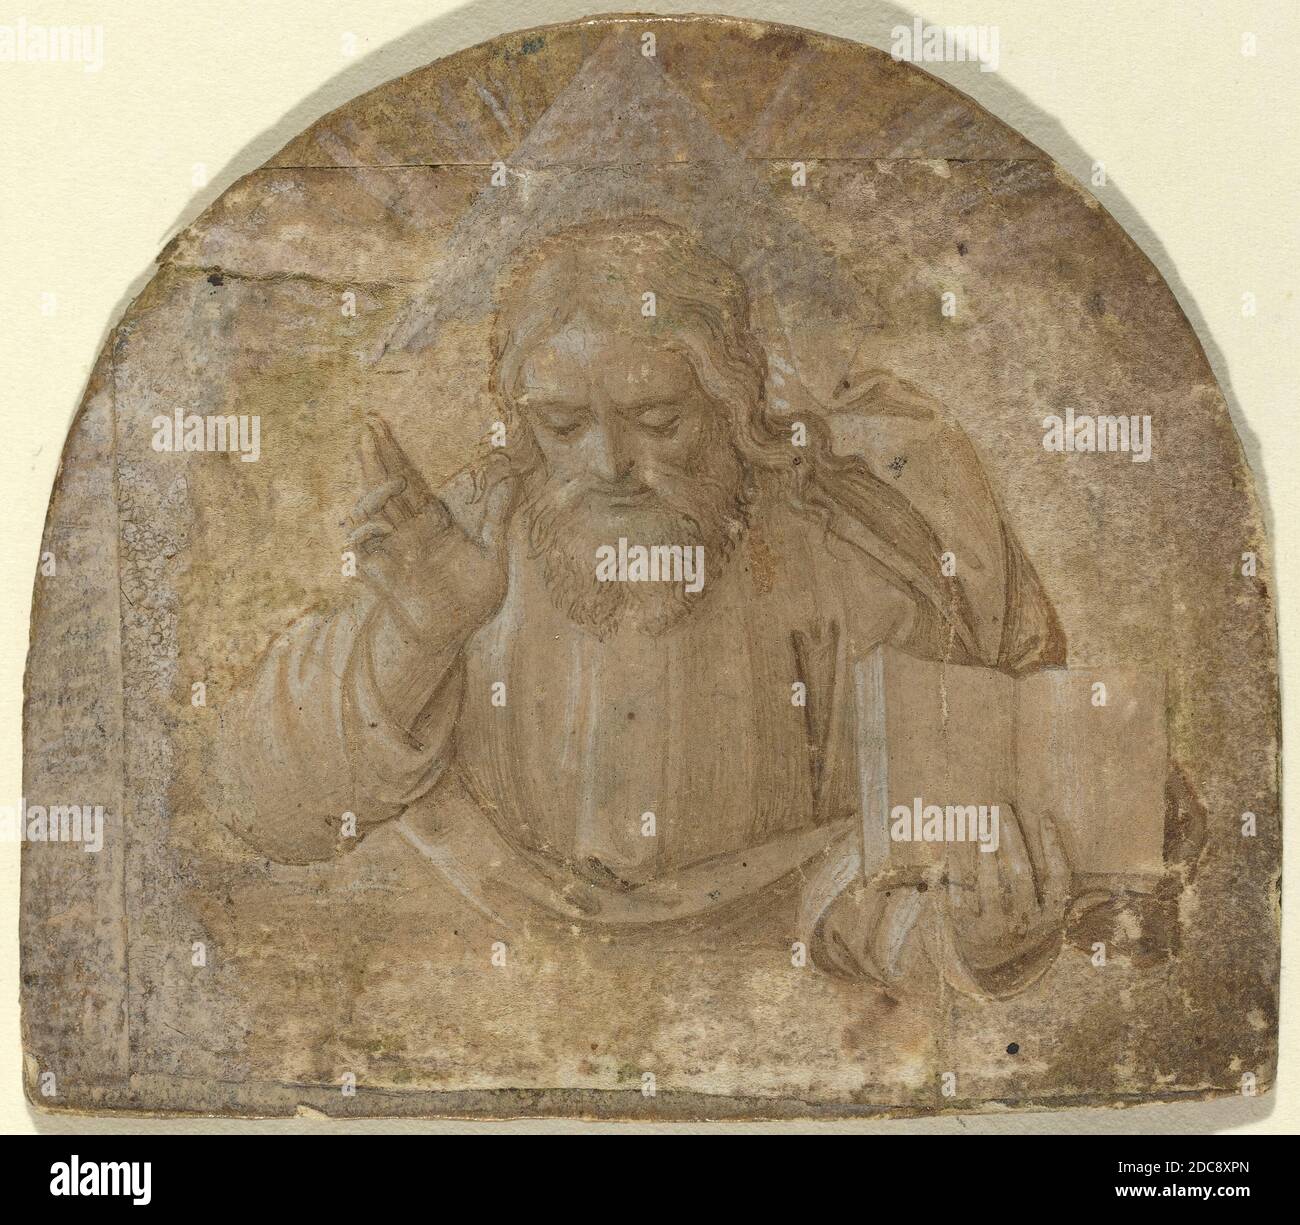 Girolamo dai Libri, (artist), Lombard, 1474 - 1555, God the Father with His Right Hand Raised in Blessing, leadpoint(?), pen and brown ink and wash, heightened with white on cream-colored prepared(?) paper laid down on wood panel, overall (lunette): 7 x 8.1 cm (2 3/4 x 3 3/16 in Stock Photo